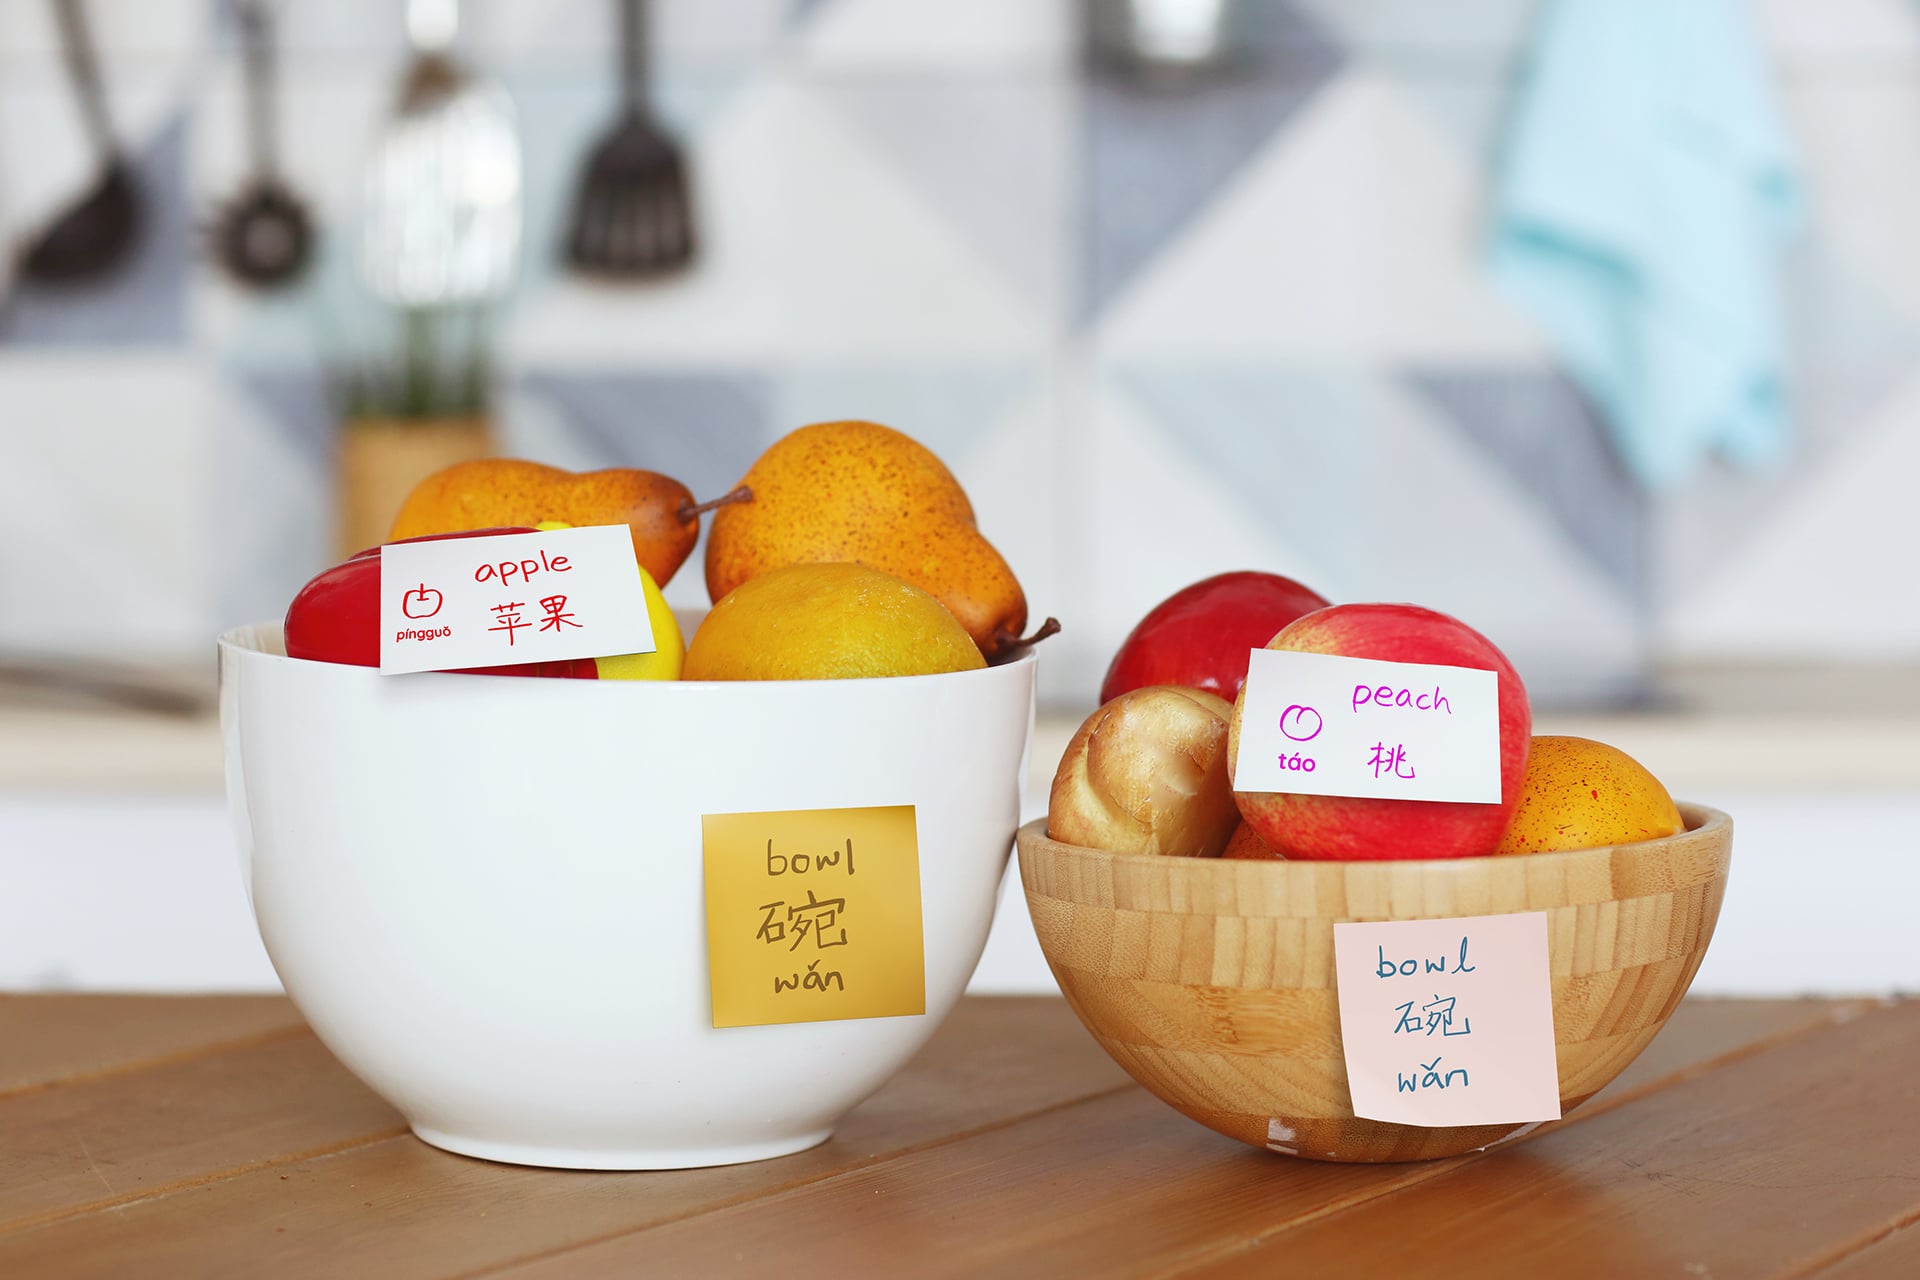 Help your kids learn Chinese through labelled items at home